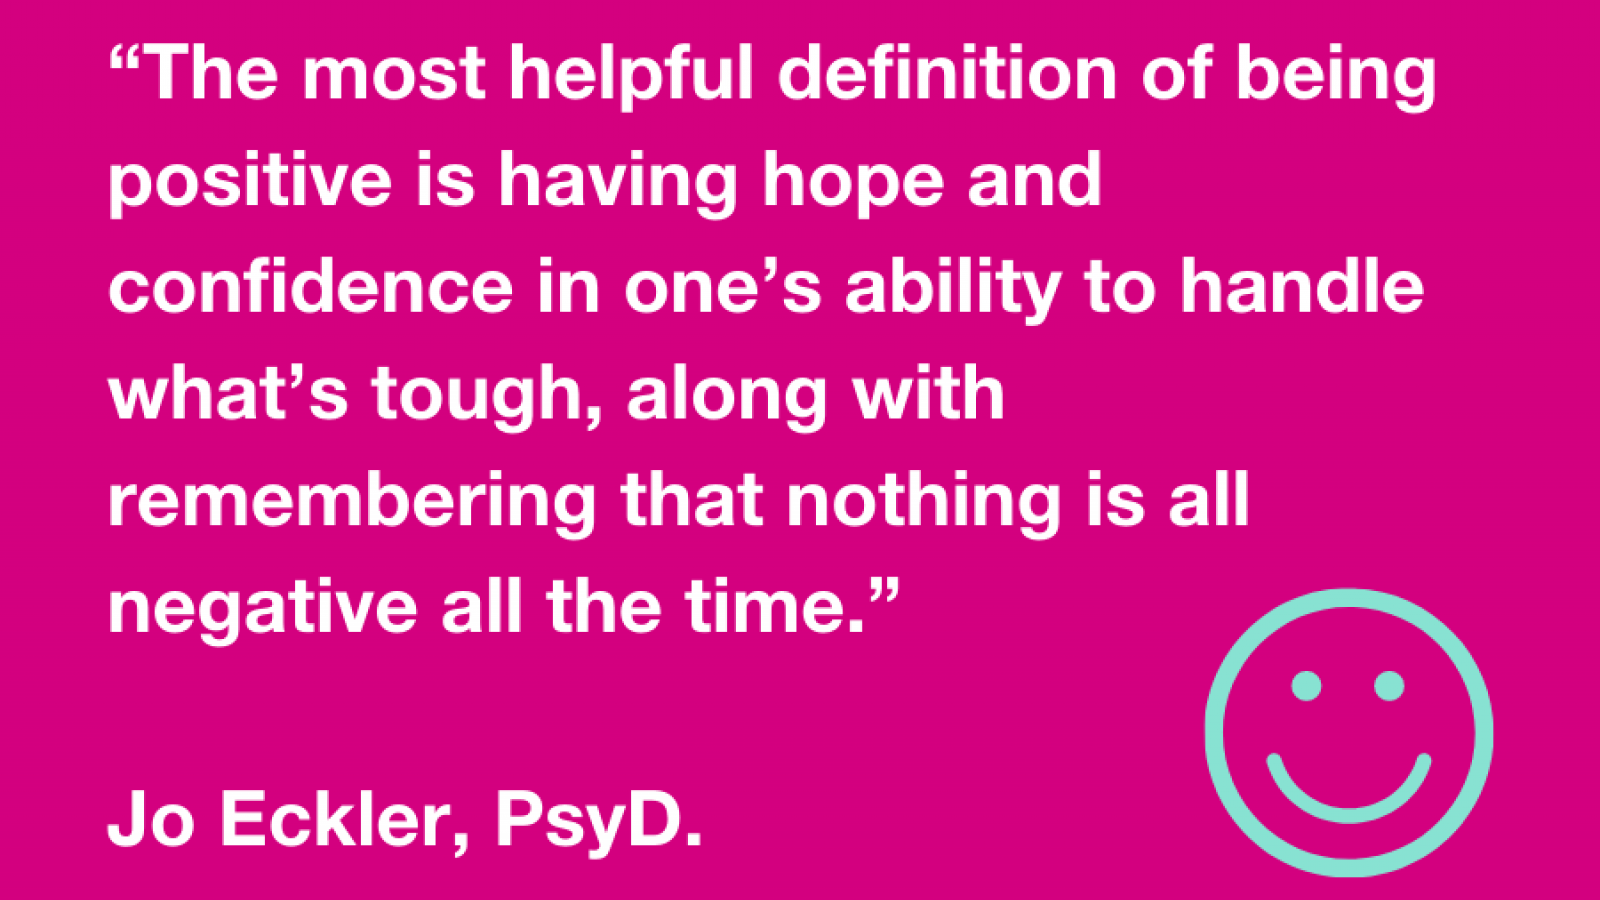 Quote from Jo Eckler reads the most helpful definition of being positive is having the confidence in having hope and confidence in one's ability to handle what's tough, along with remembering that nothing is all negative all the time.